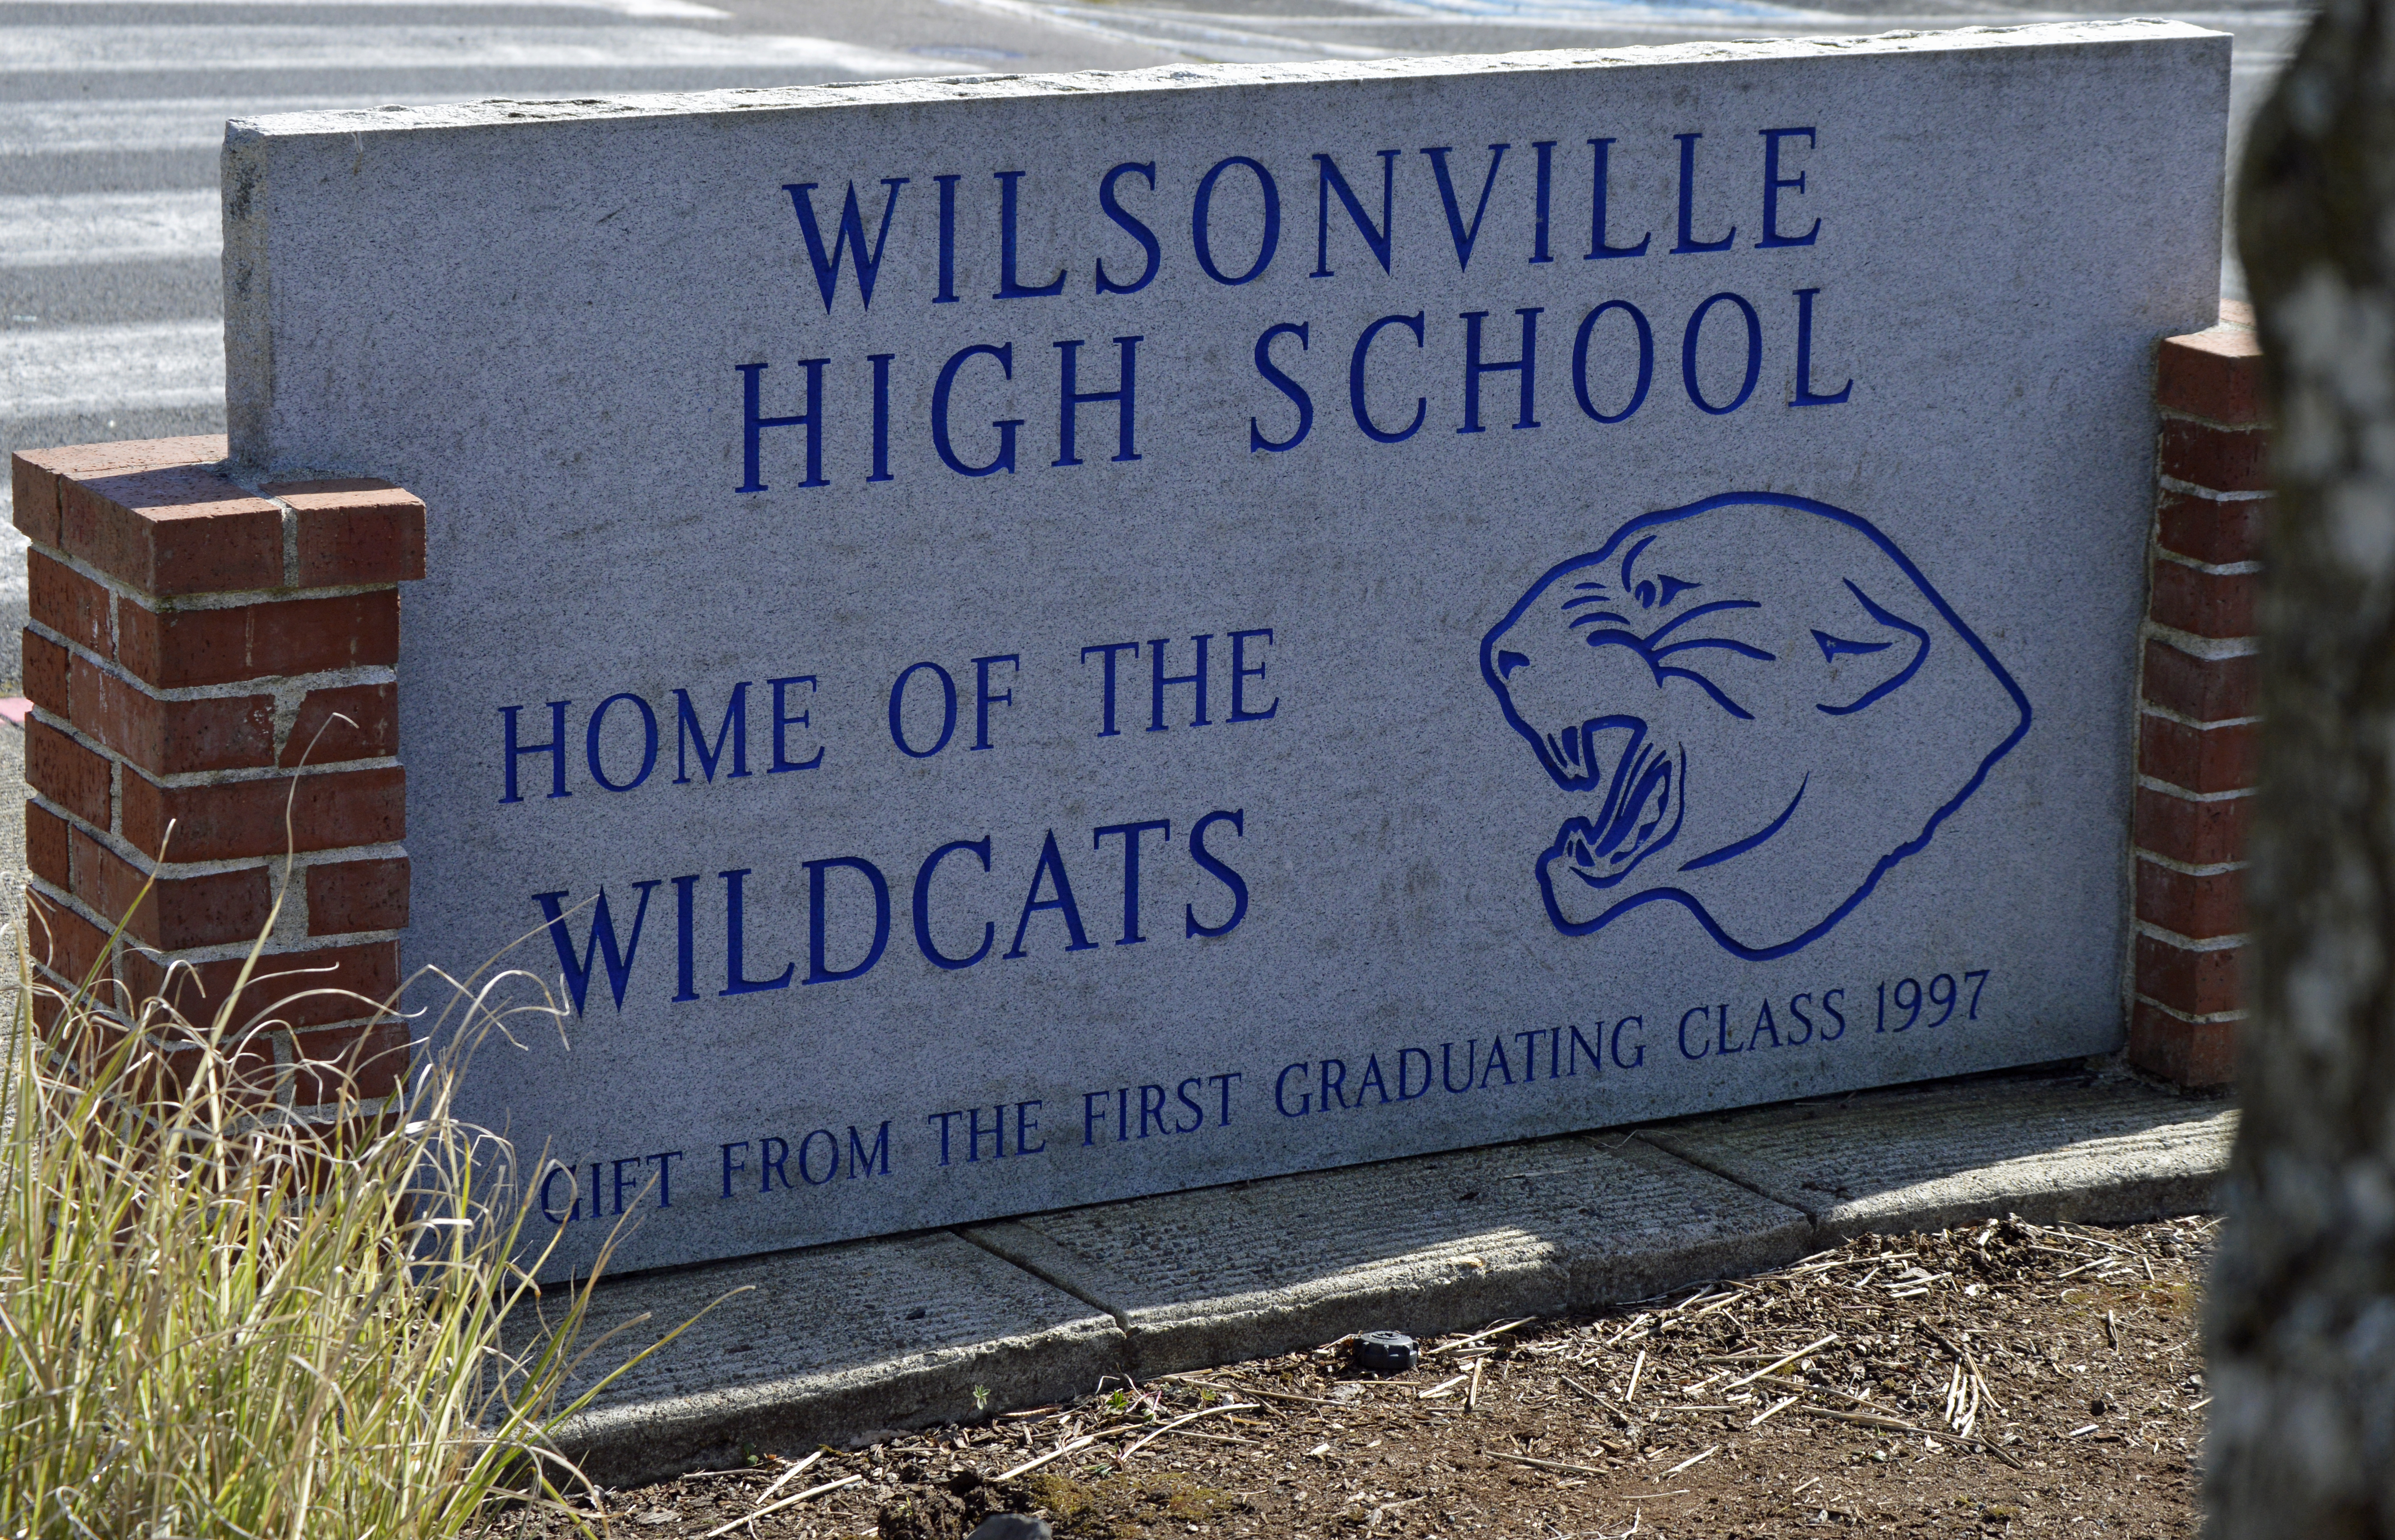 14-wilsonville-high-school-home-of-the-wildcats-the-kelly-group-real-estate